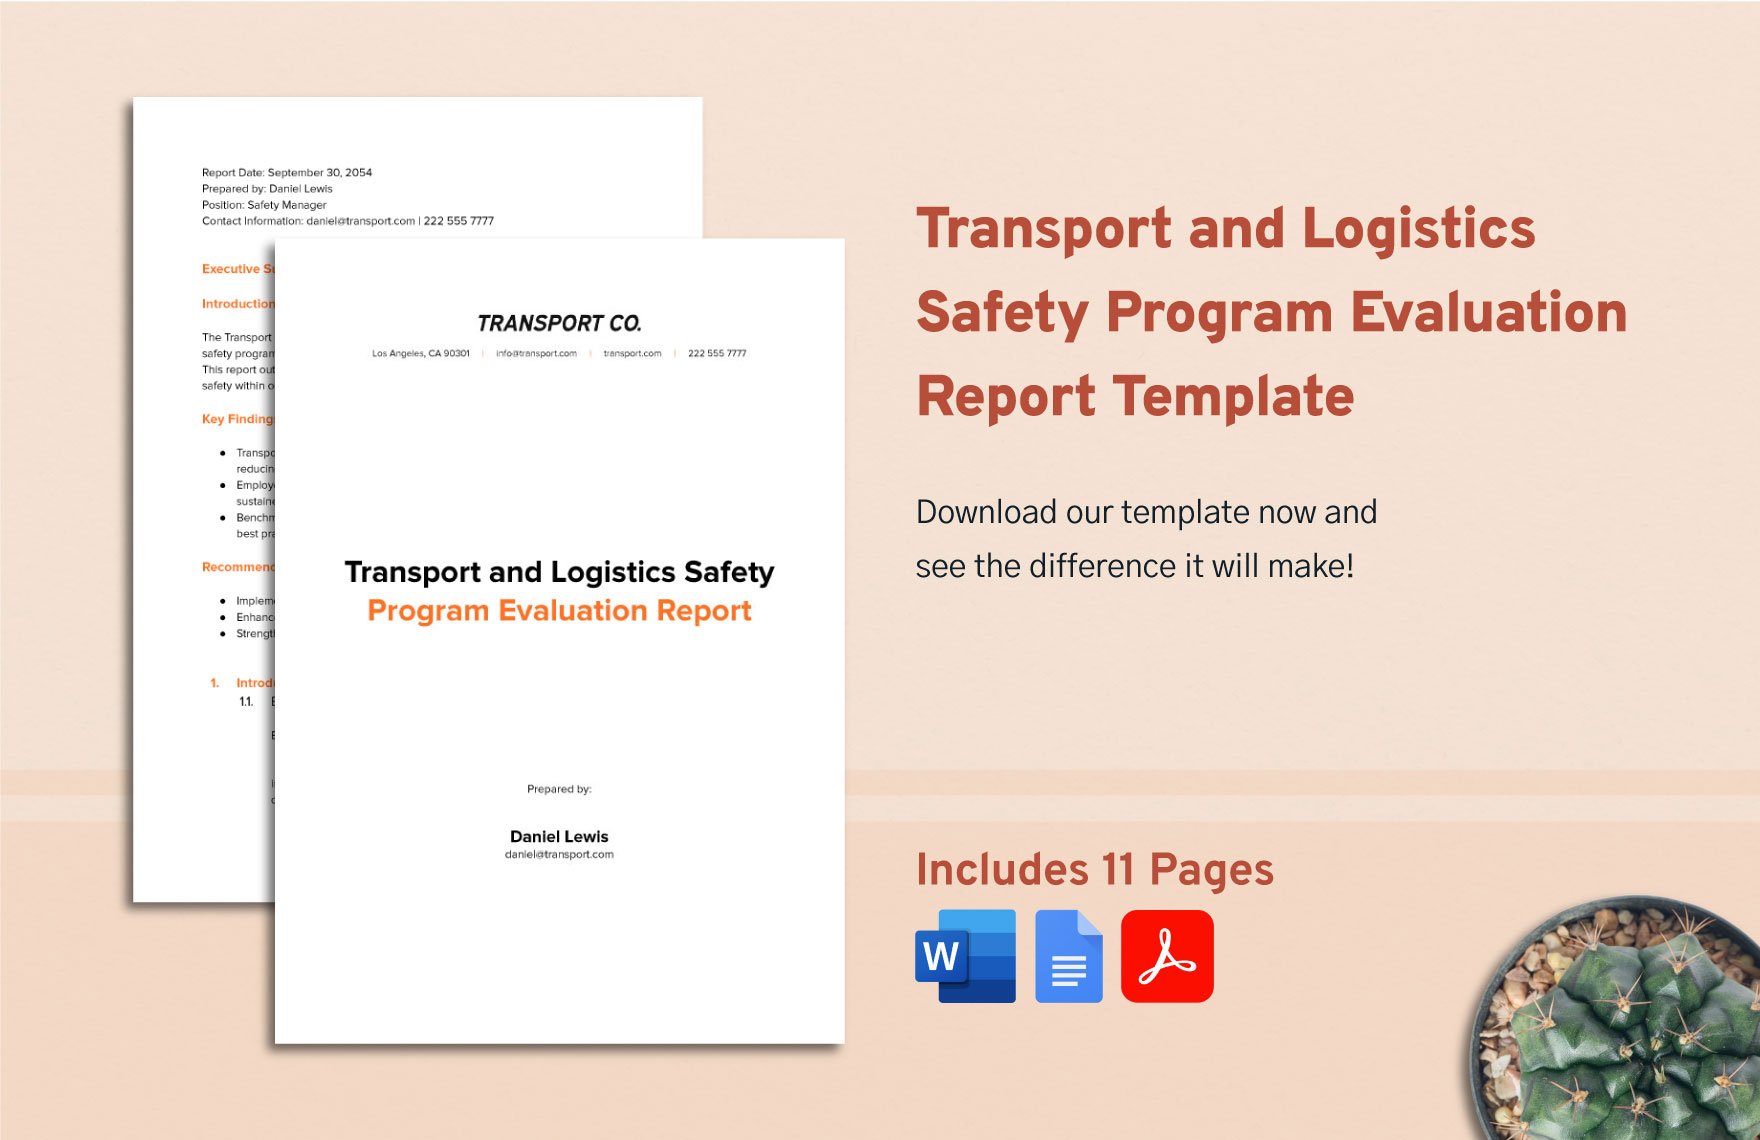 Transport and Logistics Safety Program Evaluation Report Template